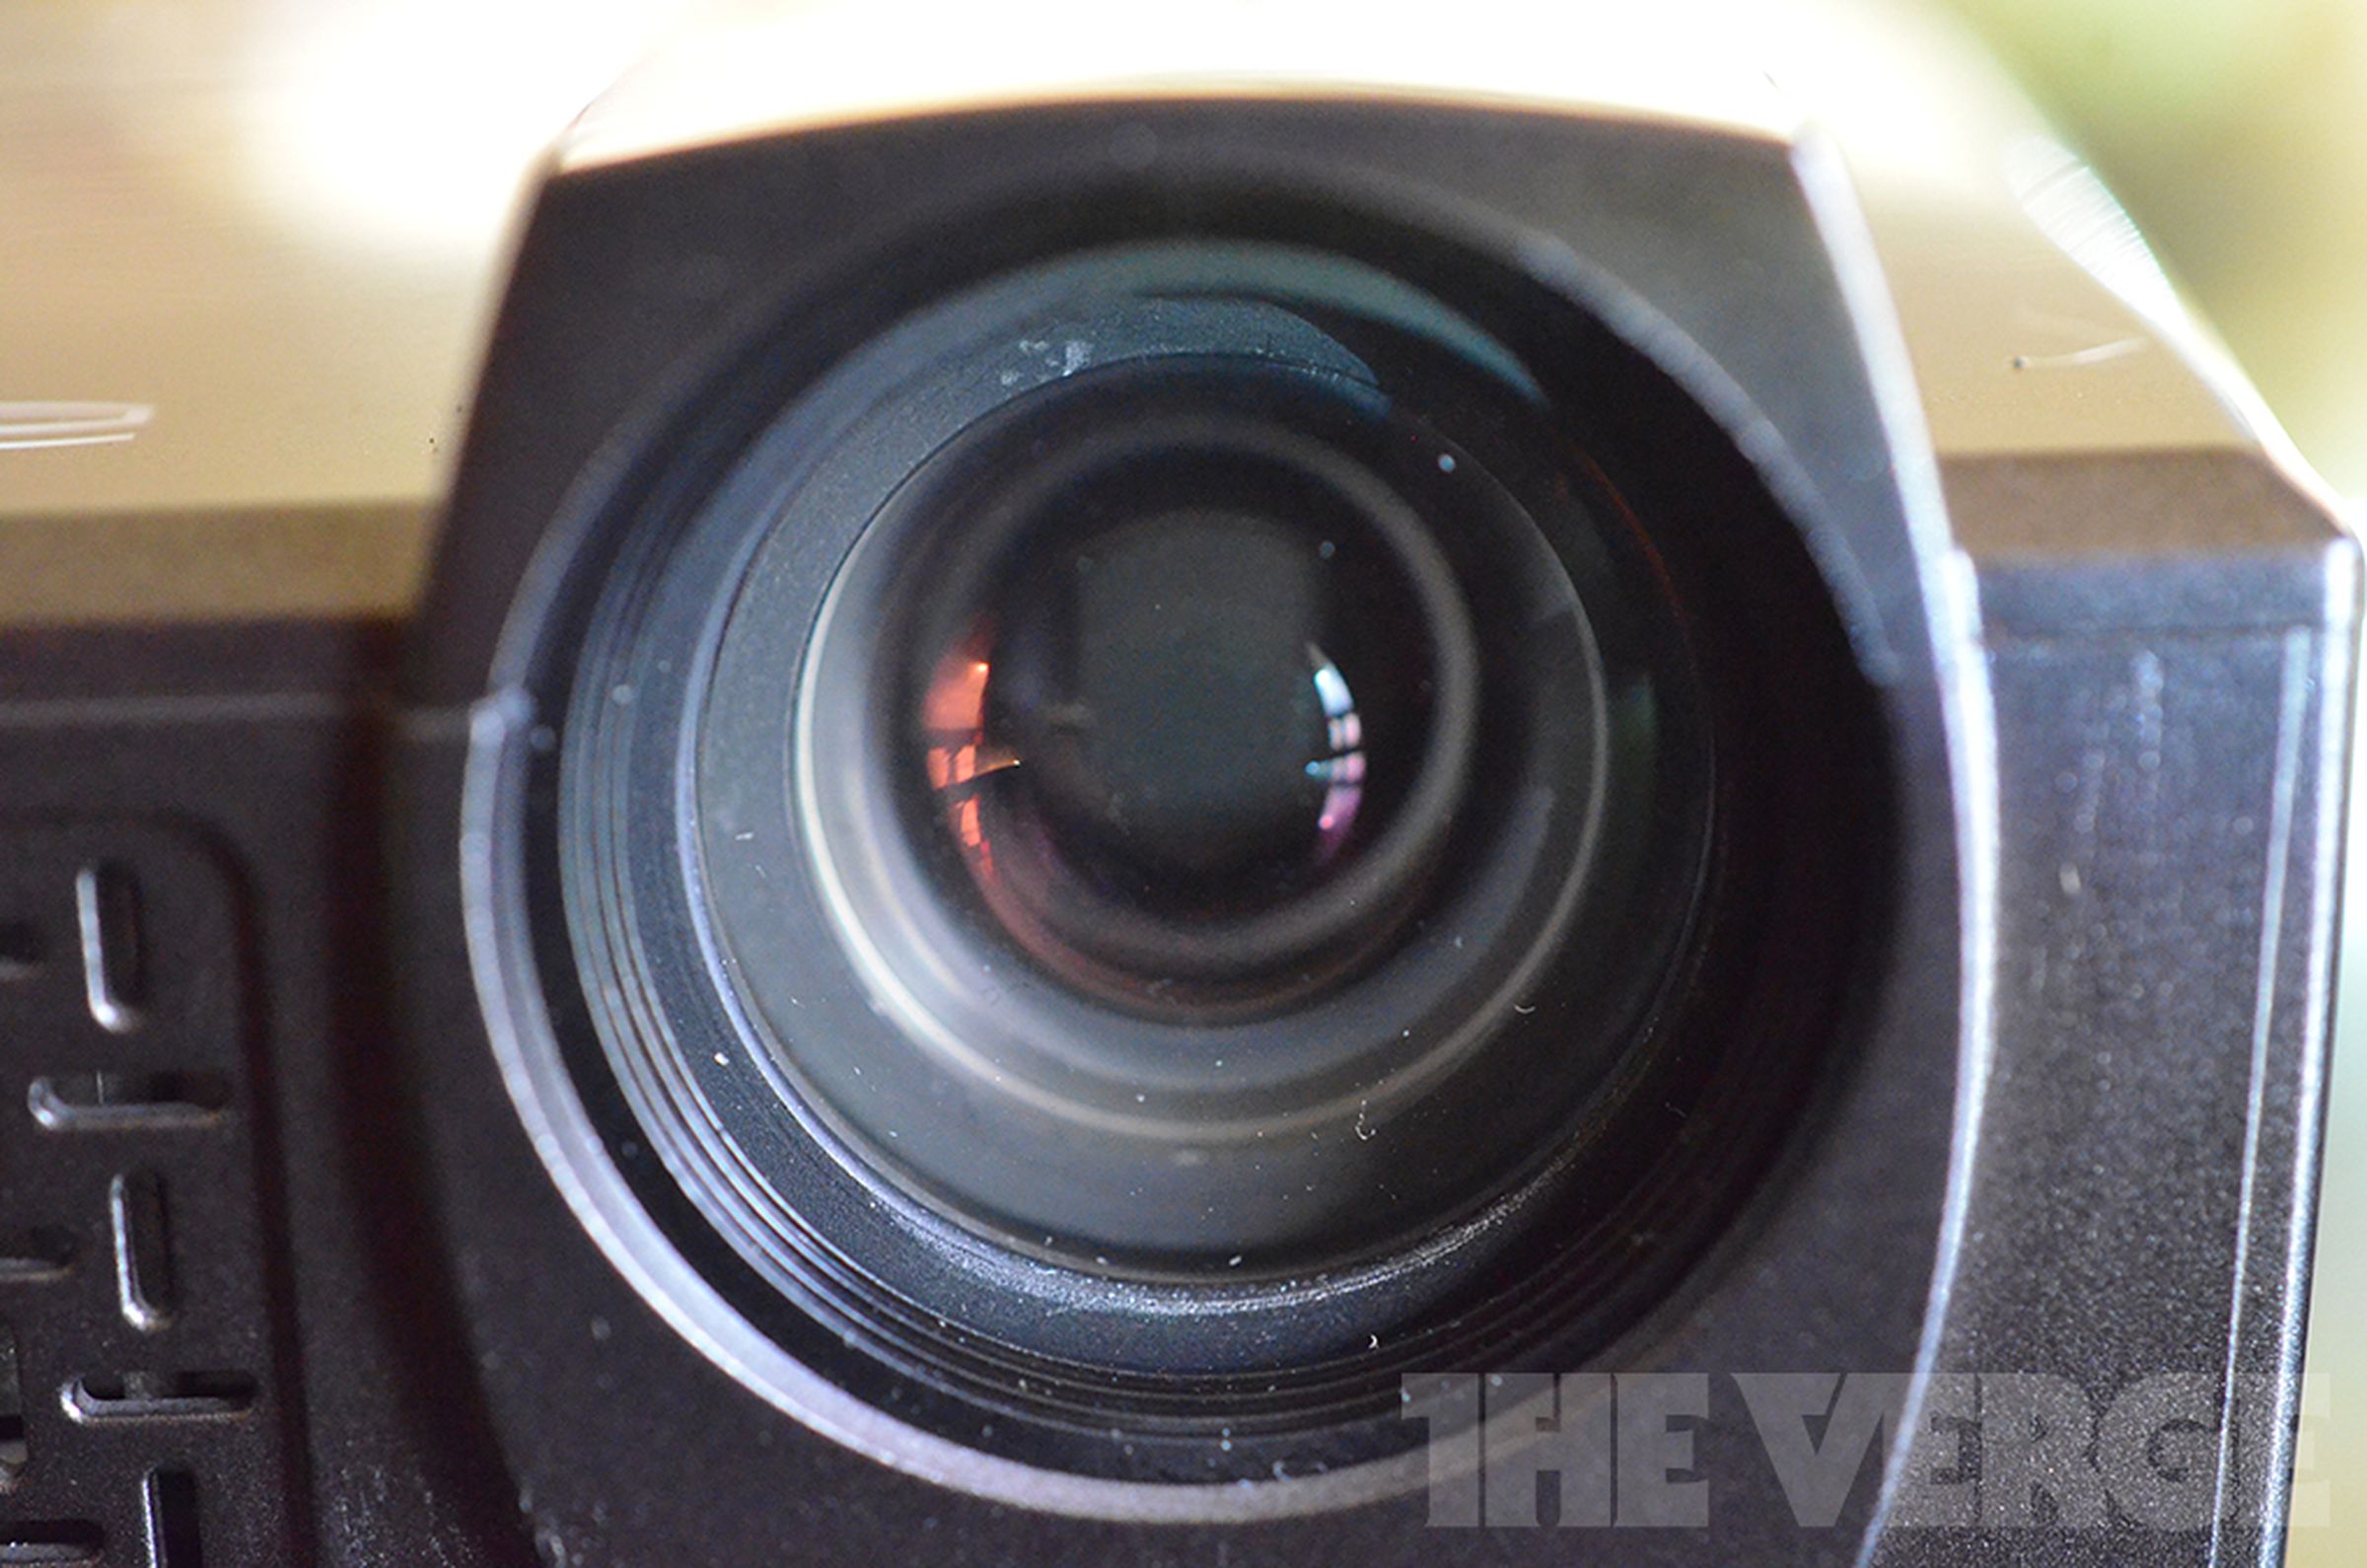 Velocity Micro's Shine projector hands-on photos